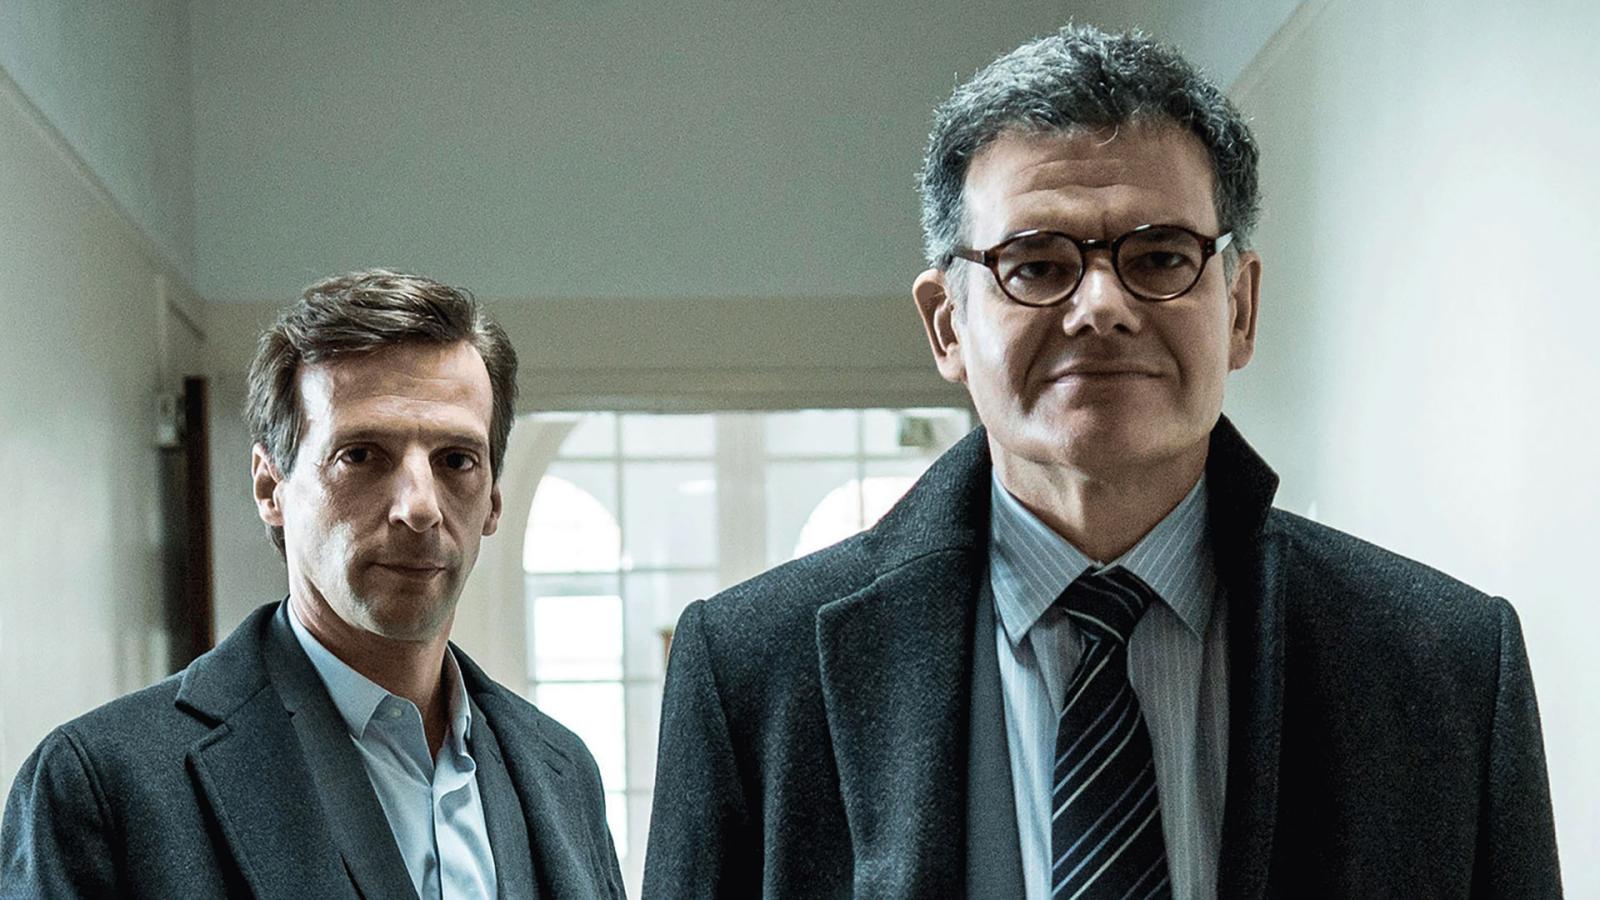 15 Best Spy TV Shows to Watch After The Americans - image 13